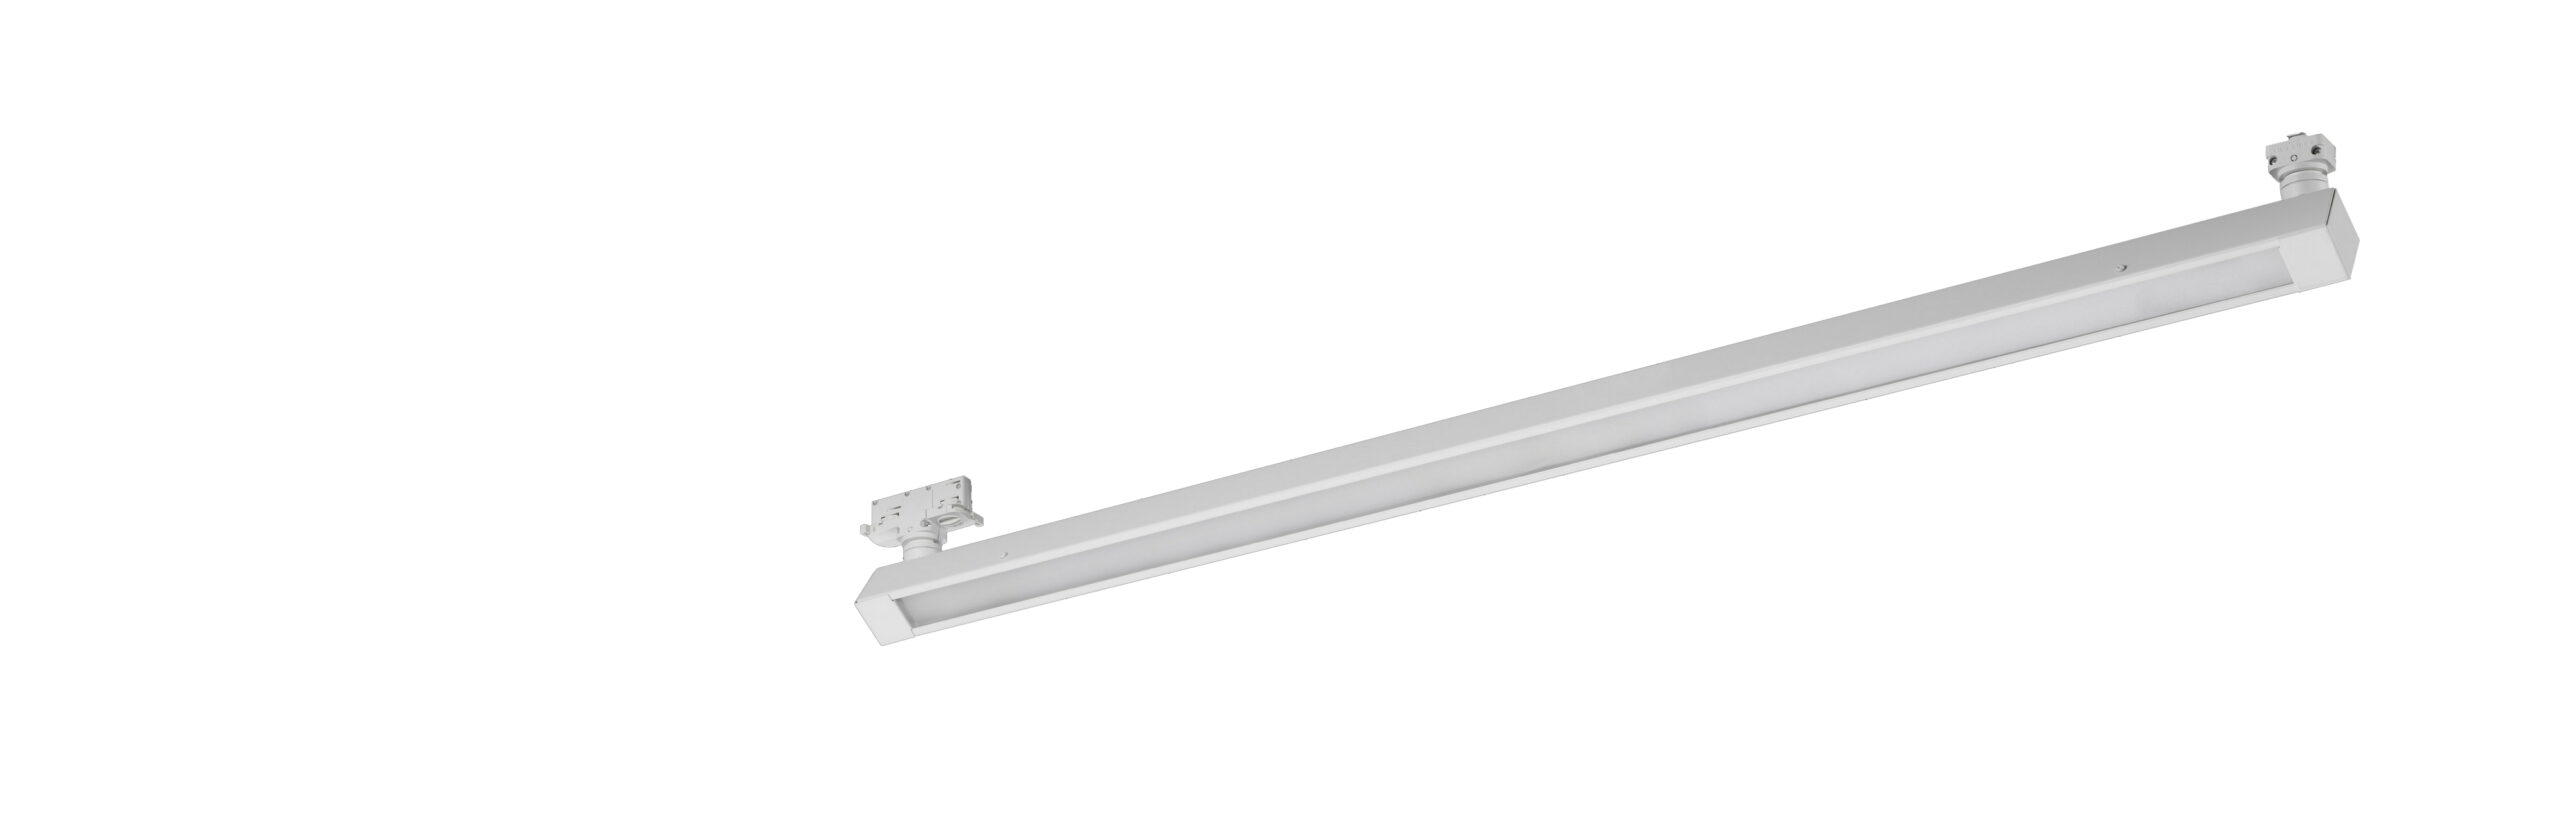 Orientable linear LED light fittings for the retail industry - ideal for when flexible lighting solutions are needed. 